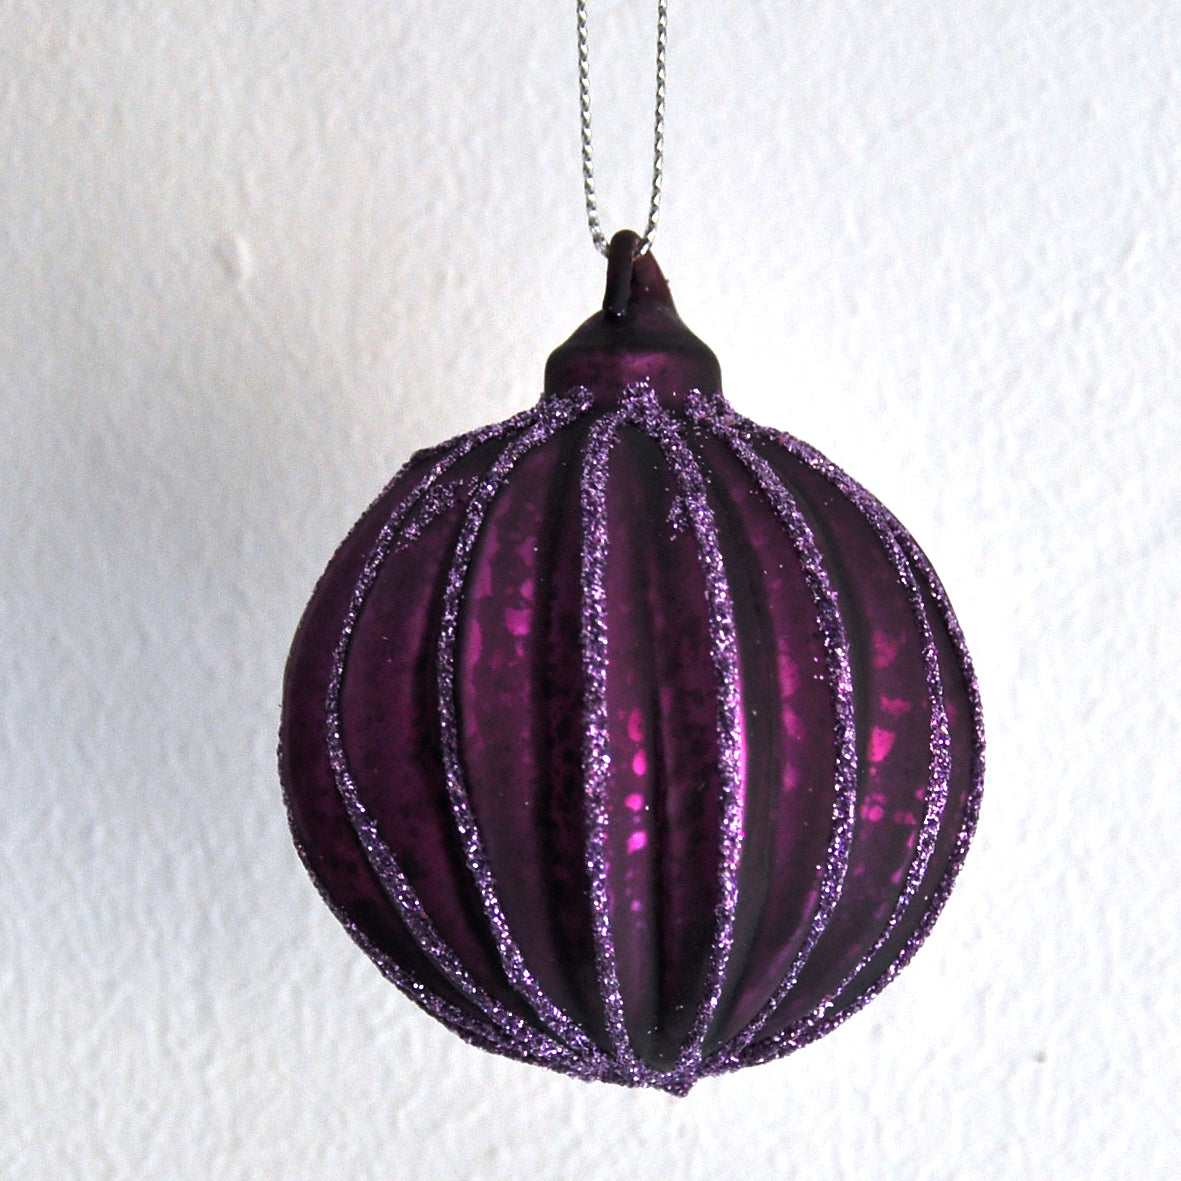 This glittery aubergine purple ridged Christmas bauble is made from glass.